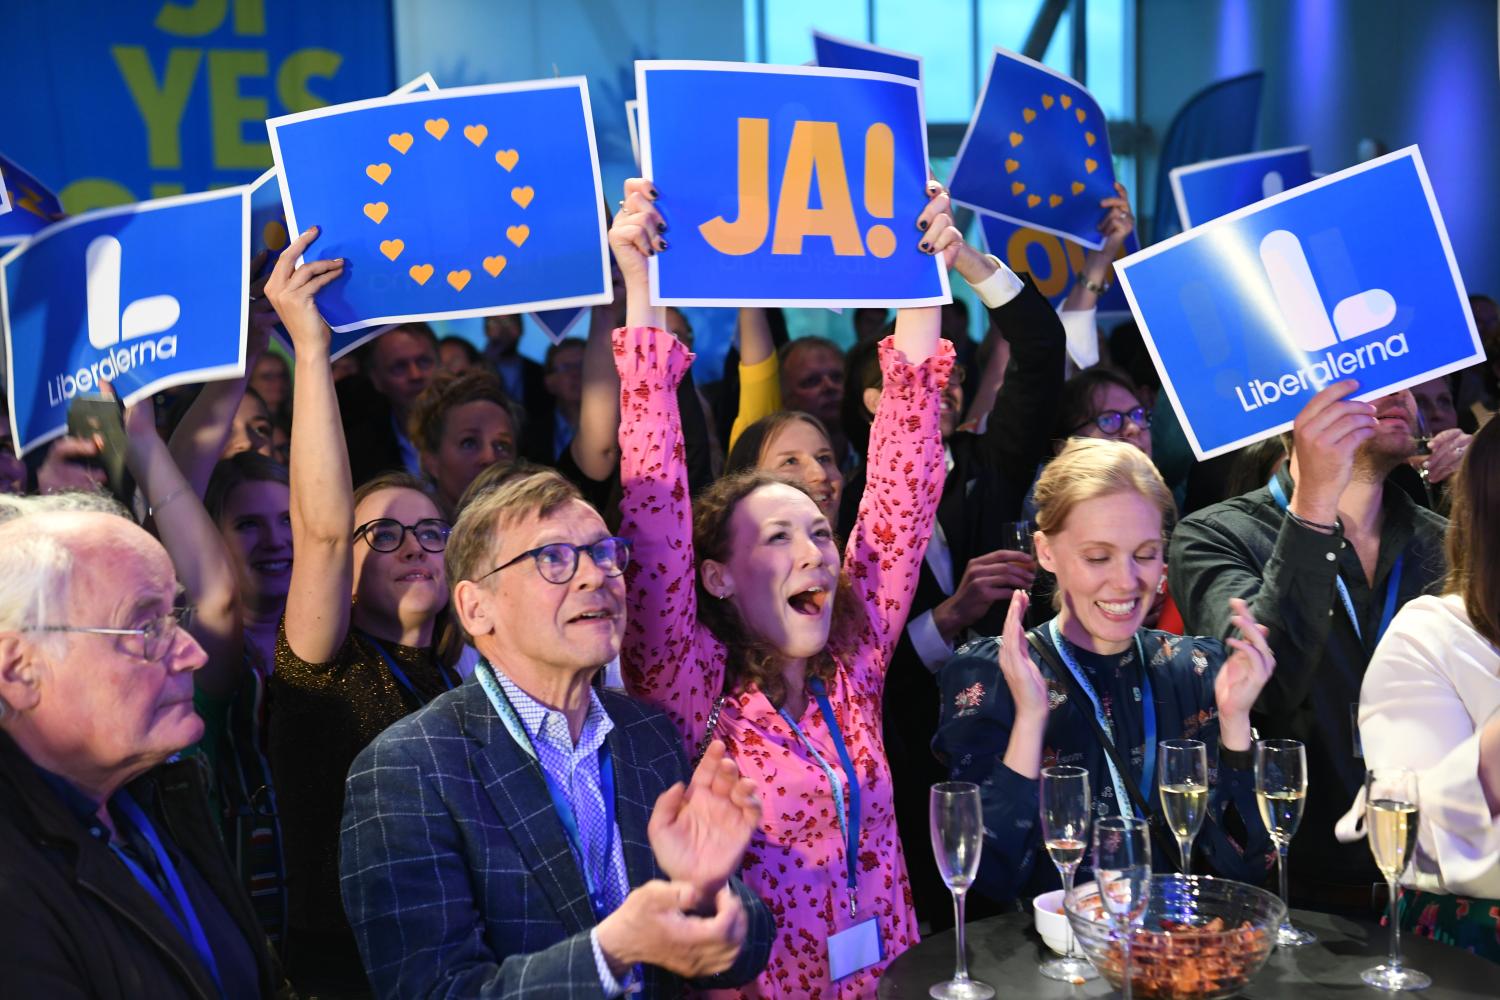 Party members celebrate during the Liberal party (Liberalerna) election night watch party in Stockholm, Sweden on May 26, 2019. TT News Agency/Fredrik Sandberg/via REUTERS ATTENTION EDITORS - THIS IMAGE WAS PROVIDED BY A THIRD PARTY. SWEDEN OUT. - RC18375151D0